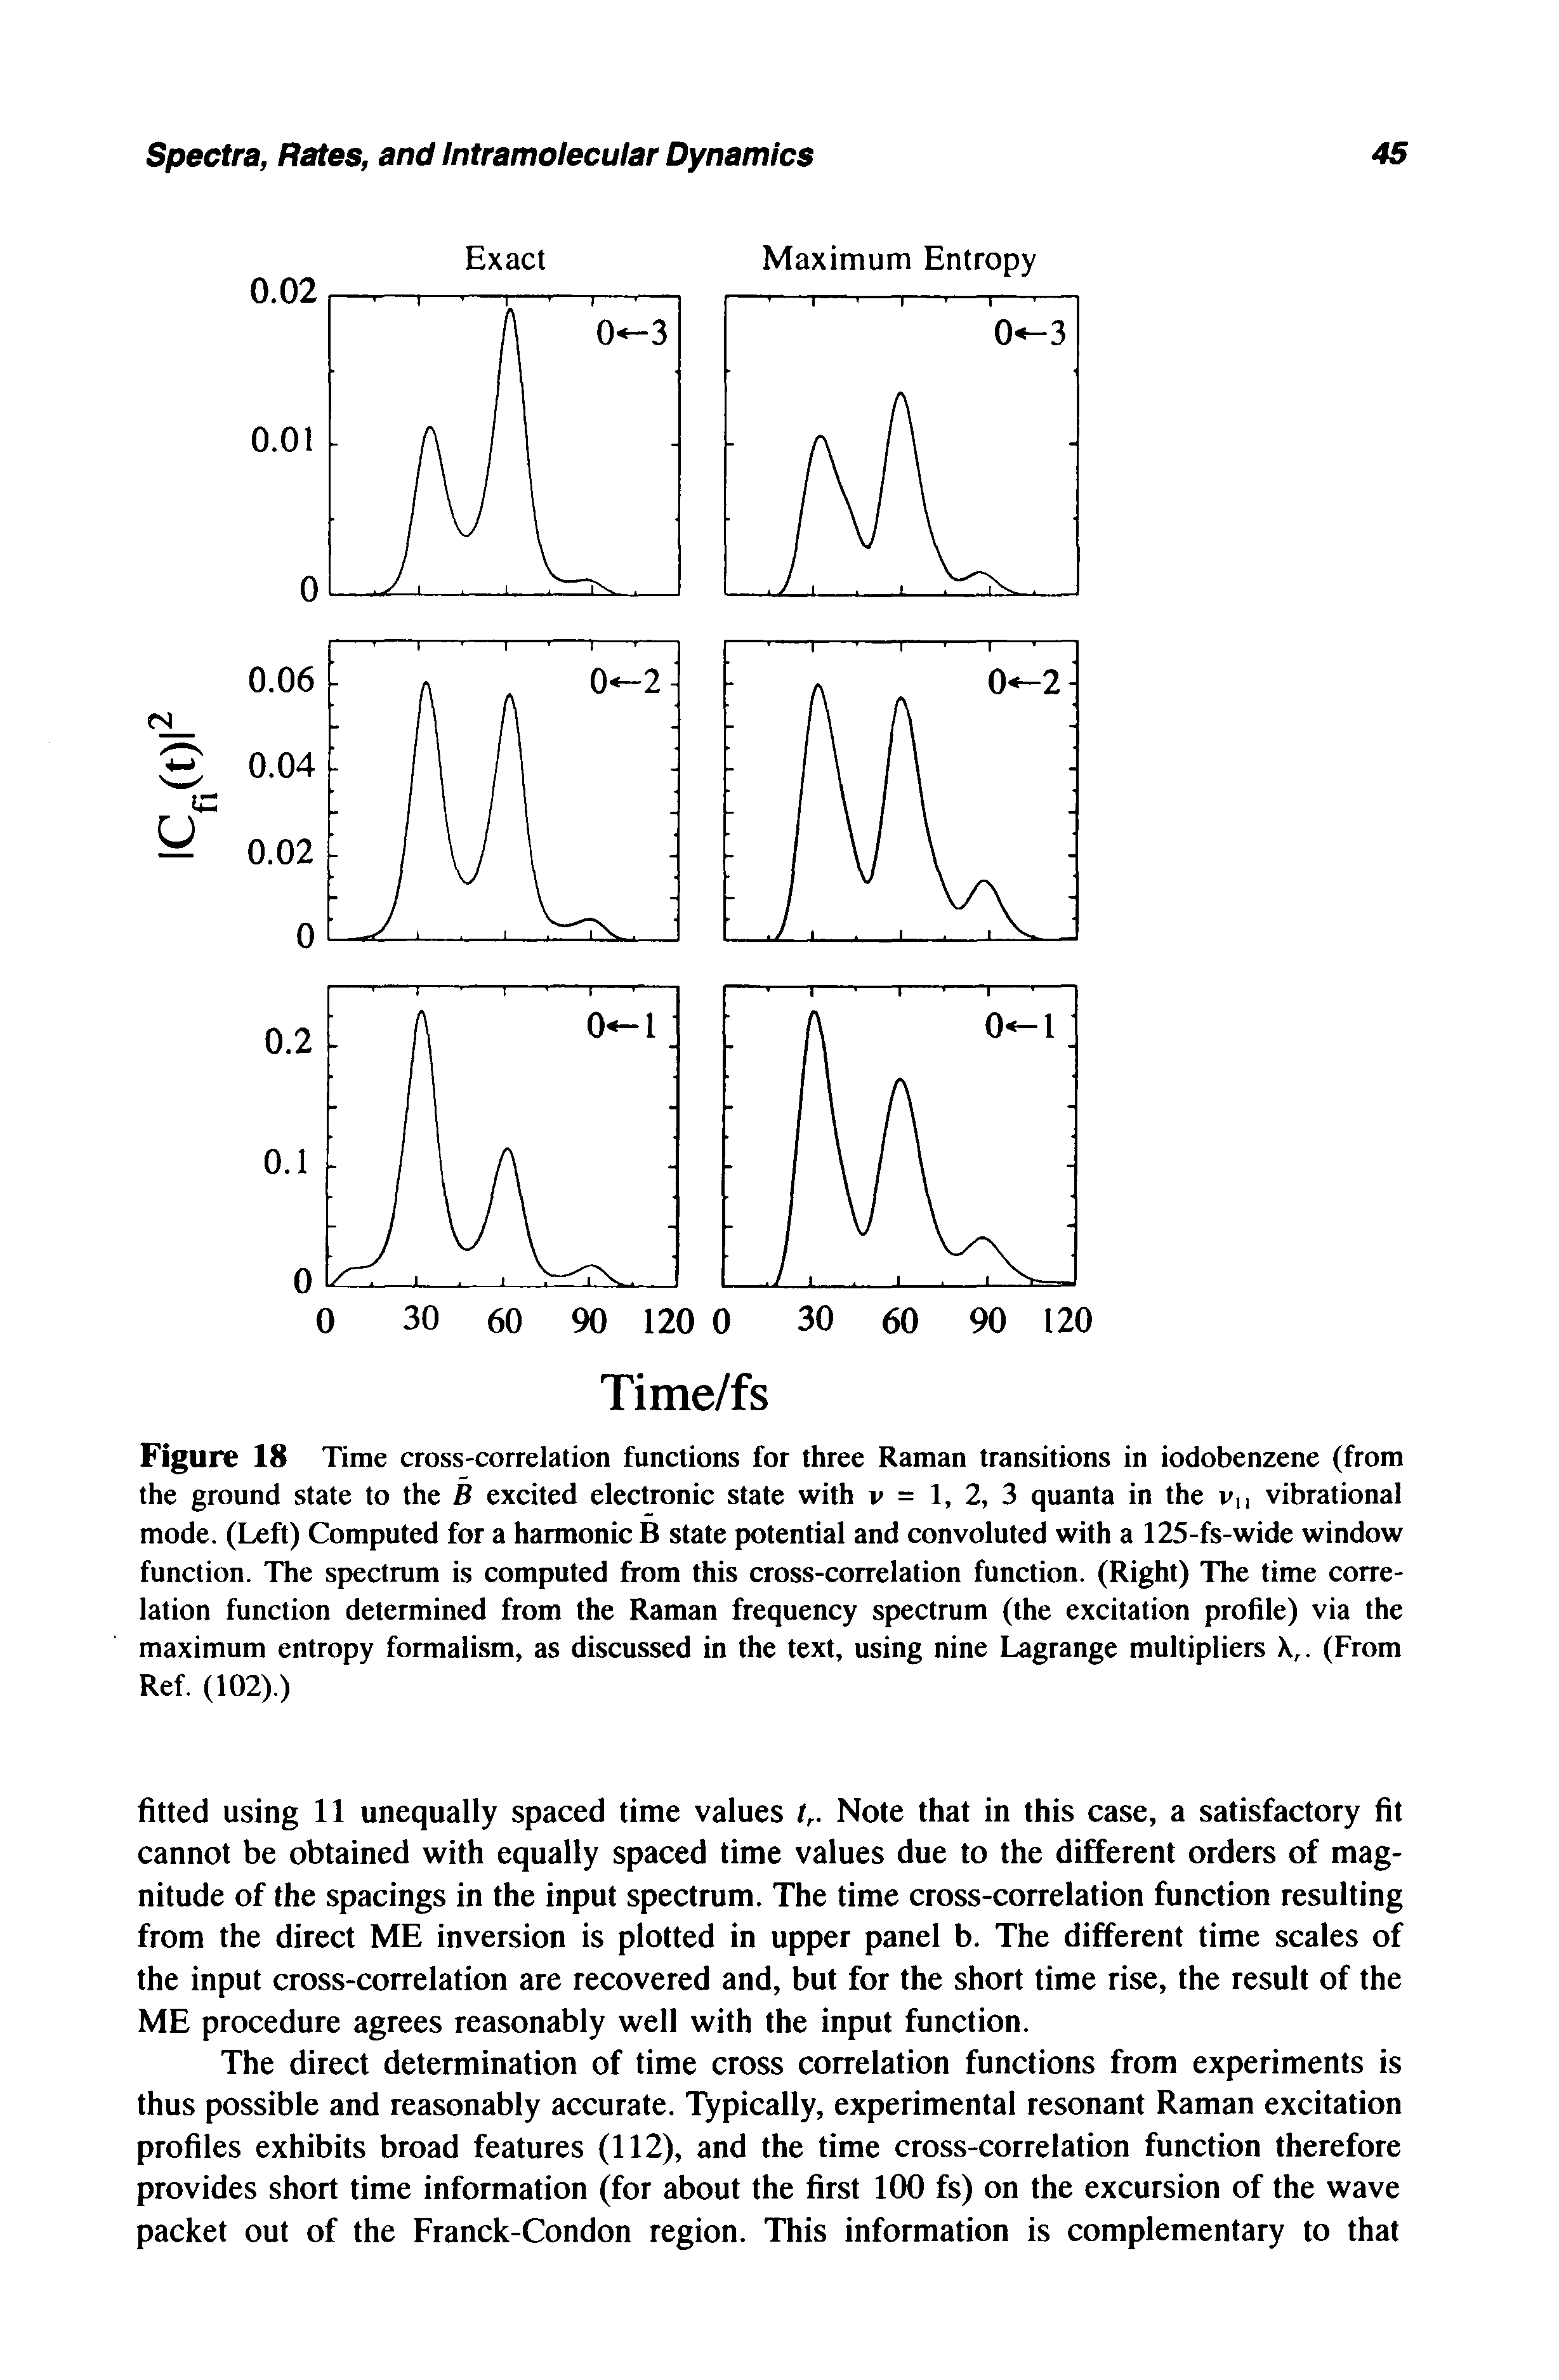 Figure 18 Time cross-correlation functions for three Raman transitions in iodobenzene (from the ground state to the B excited electronic state with v = 1, 2, 3 quanta in the vu vibrational mode. (Left) Computed for a harmonic B state potential and convoluted with a 125-fs-wide window function. The spectrum is computed from this cross-correlation function. (Right) The time correlation function determined from the Raman frequency spectrum (the excitation profile) via the maximum entropy formalism, as discussed in the text, using nine Lagrange multipliers kr. (From Ref. (102).)...